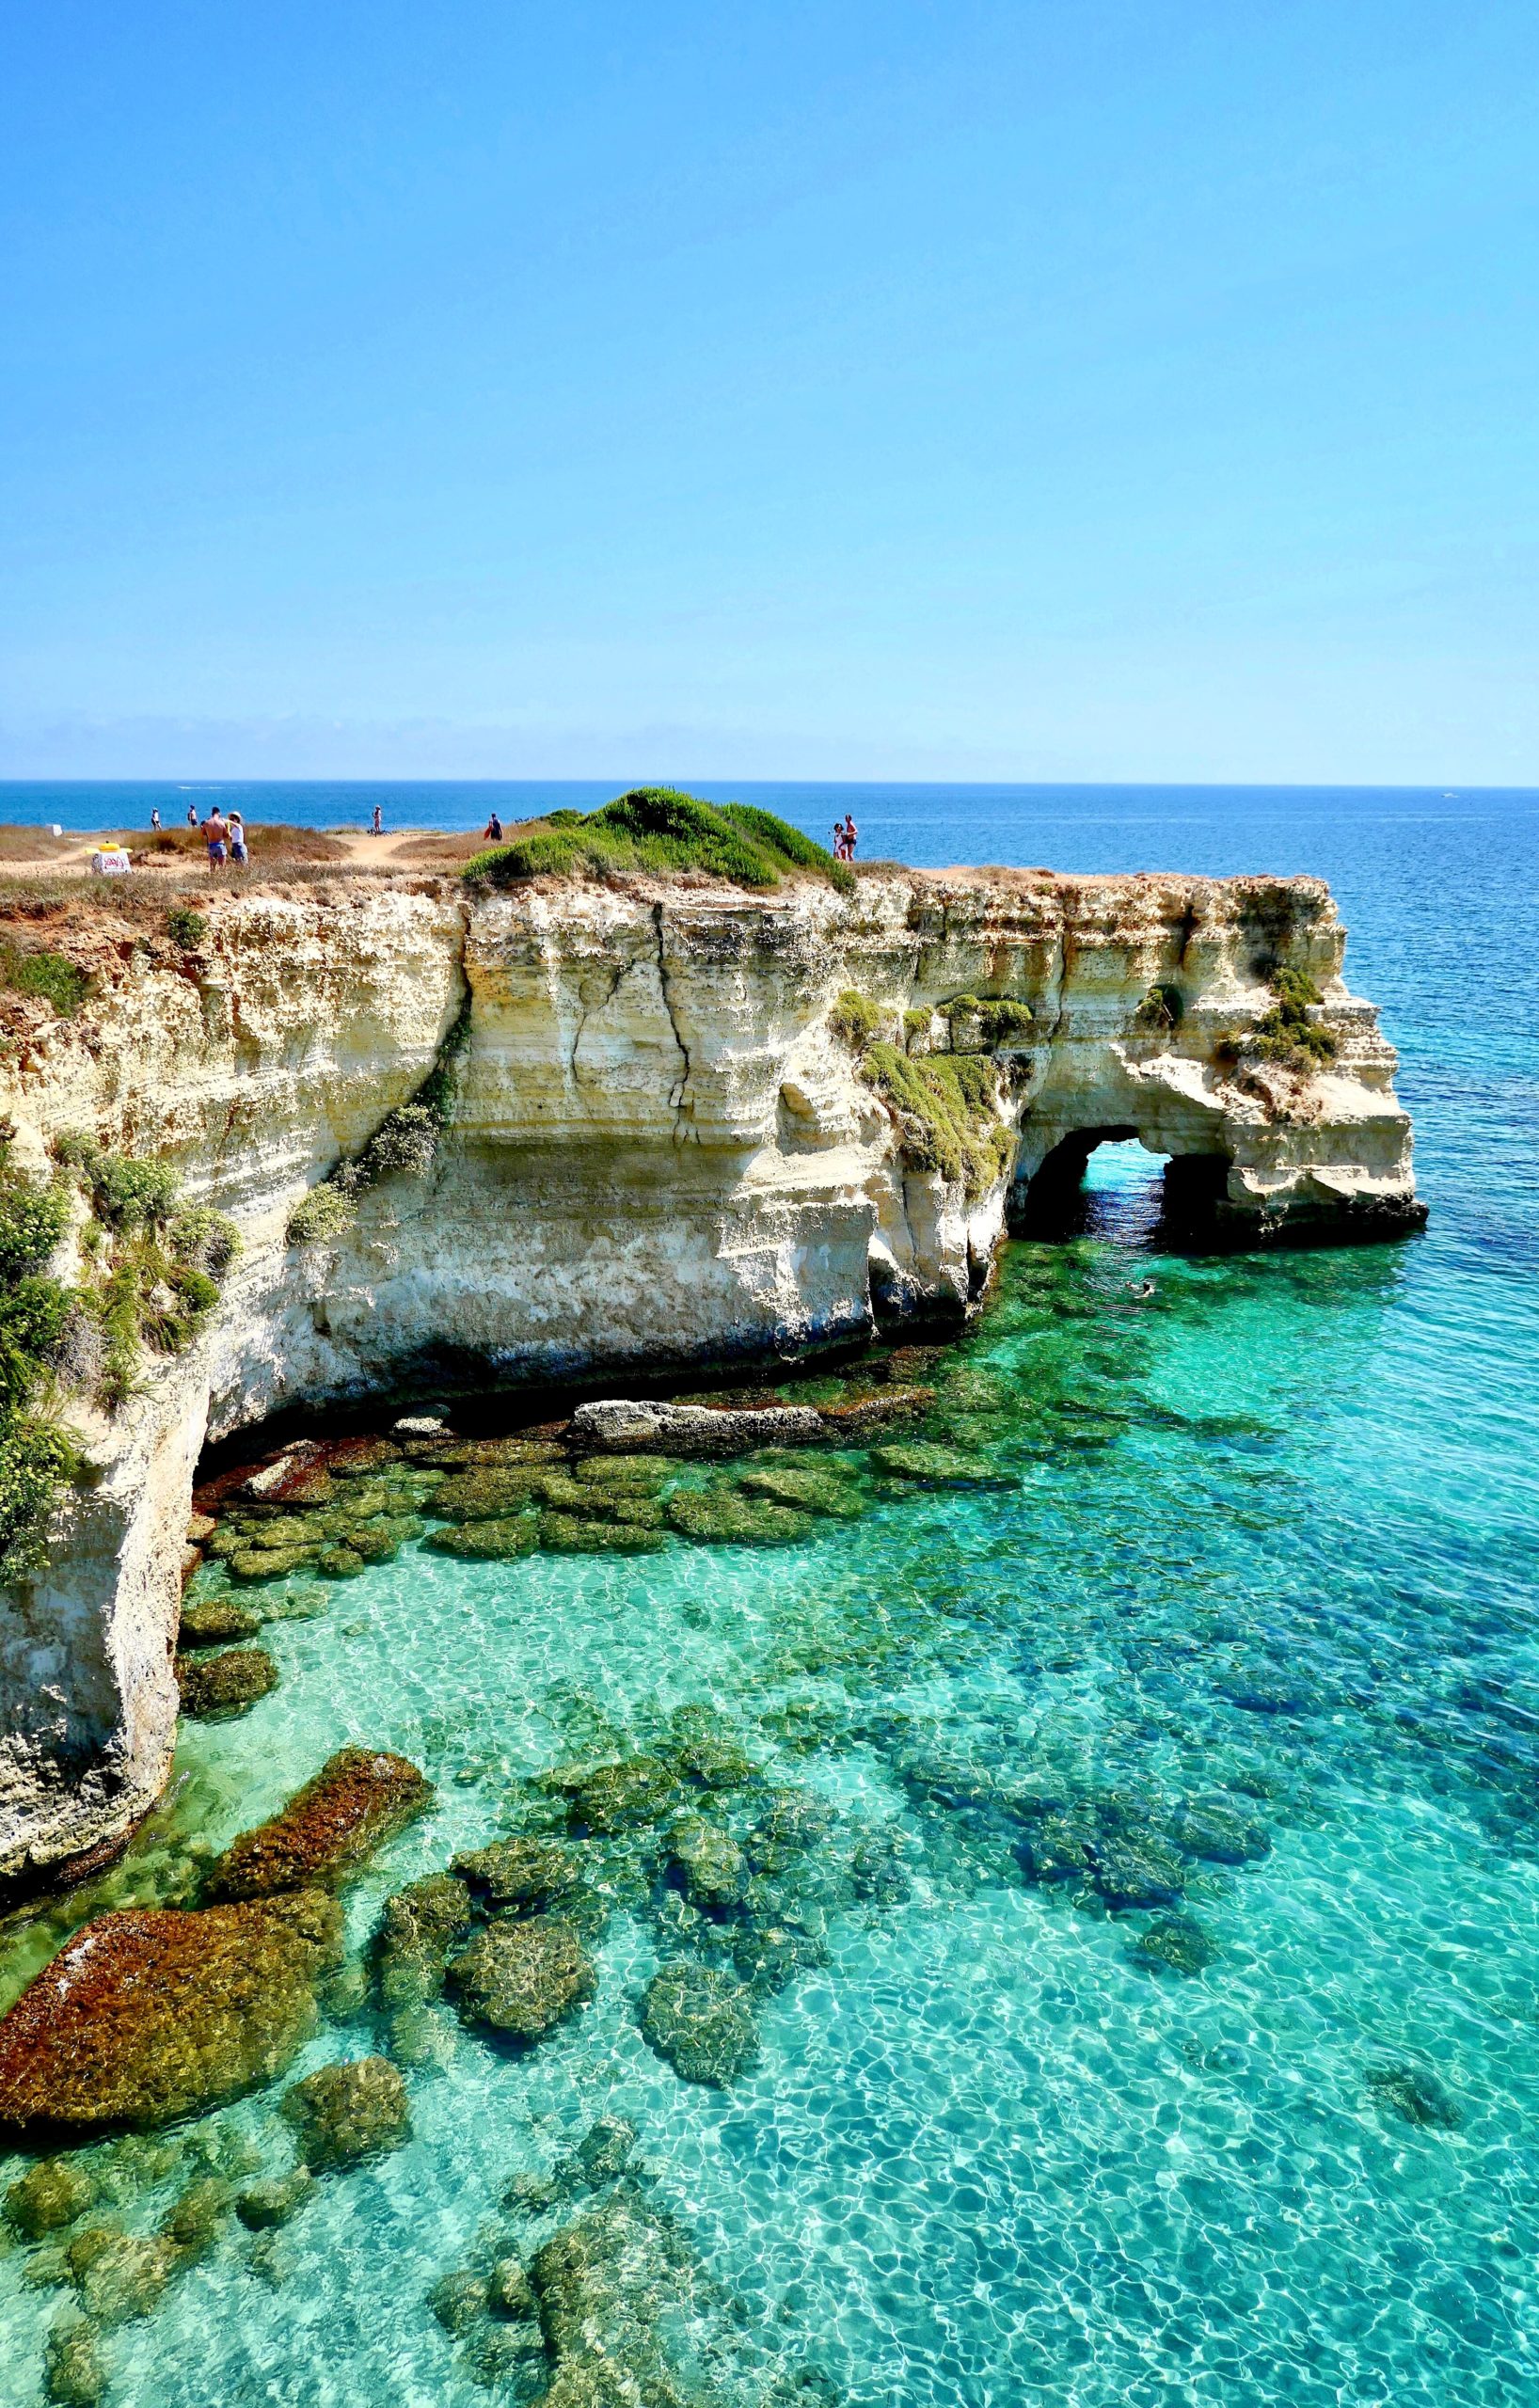 A rocky cliff towers over crystal clear ocean water in Puglia, Italy